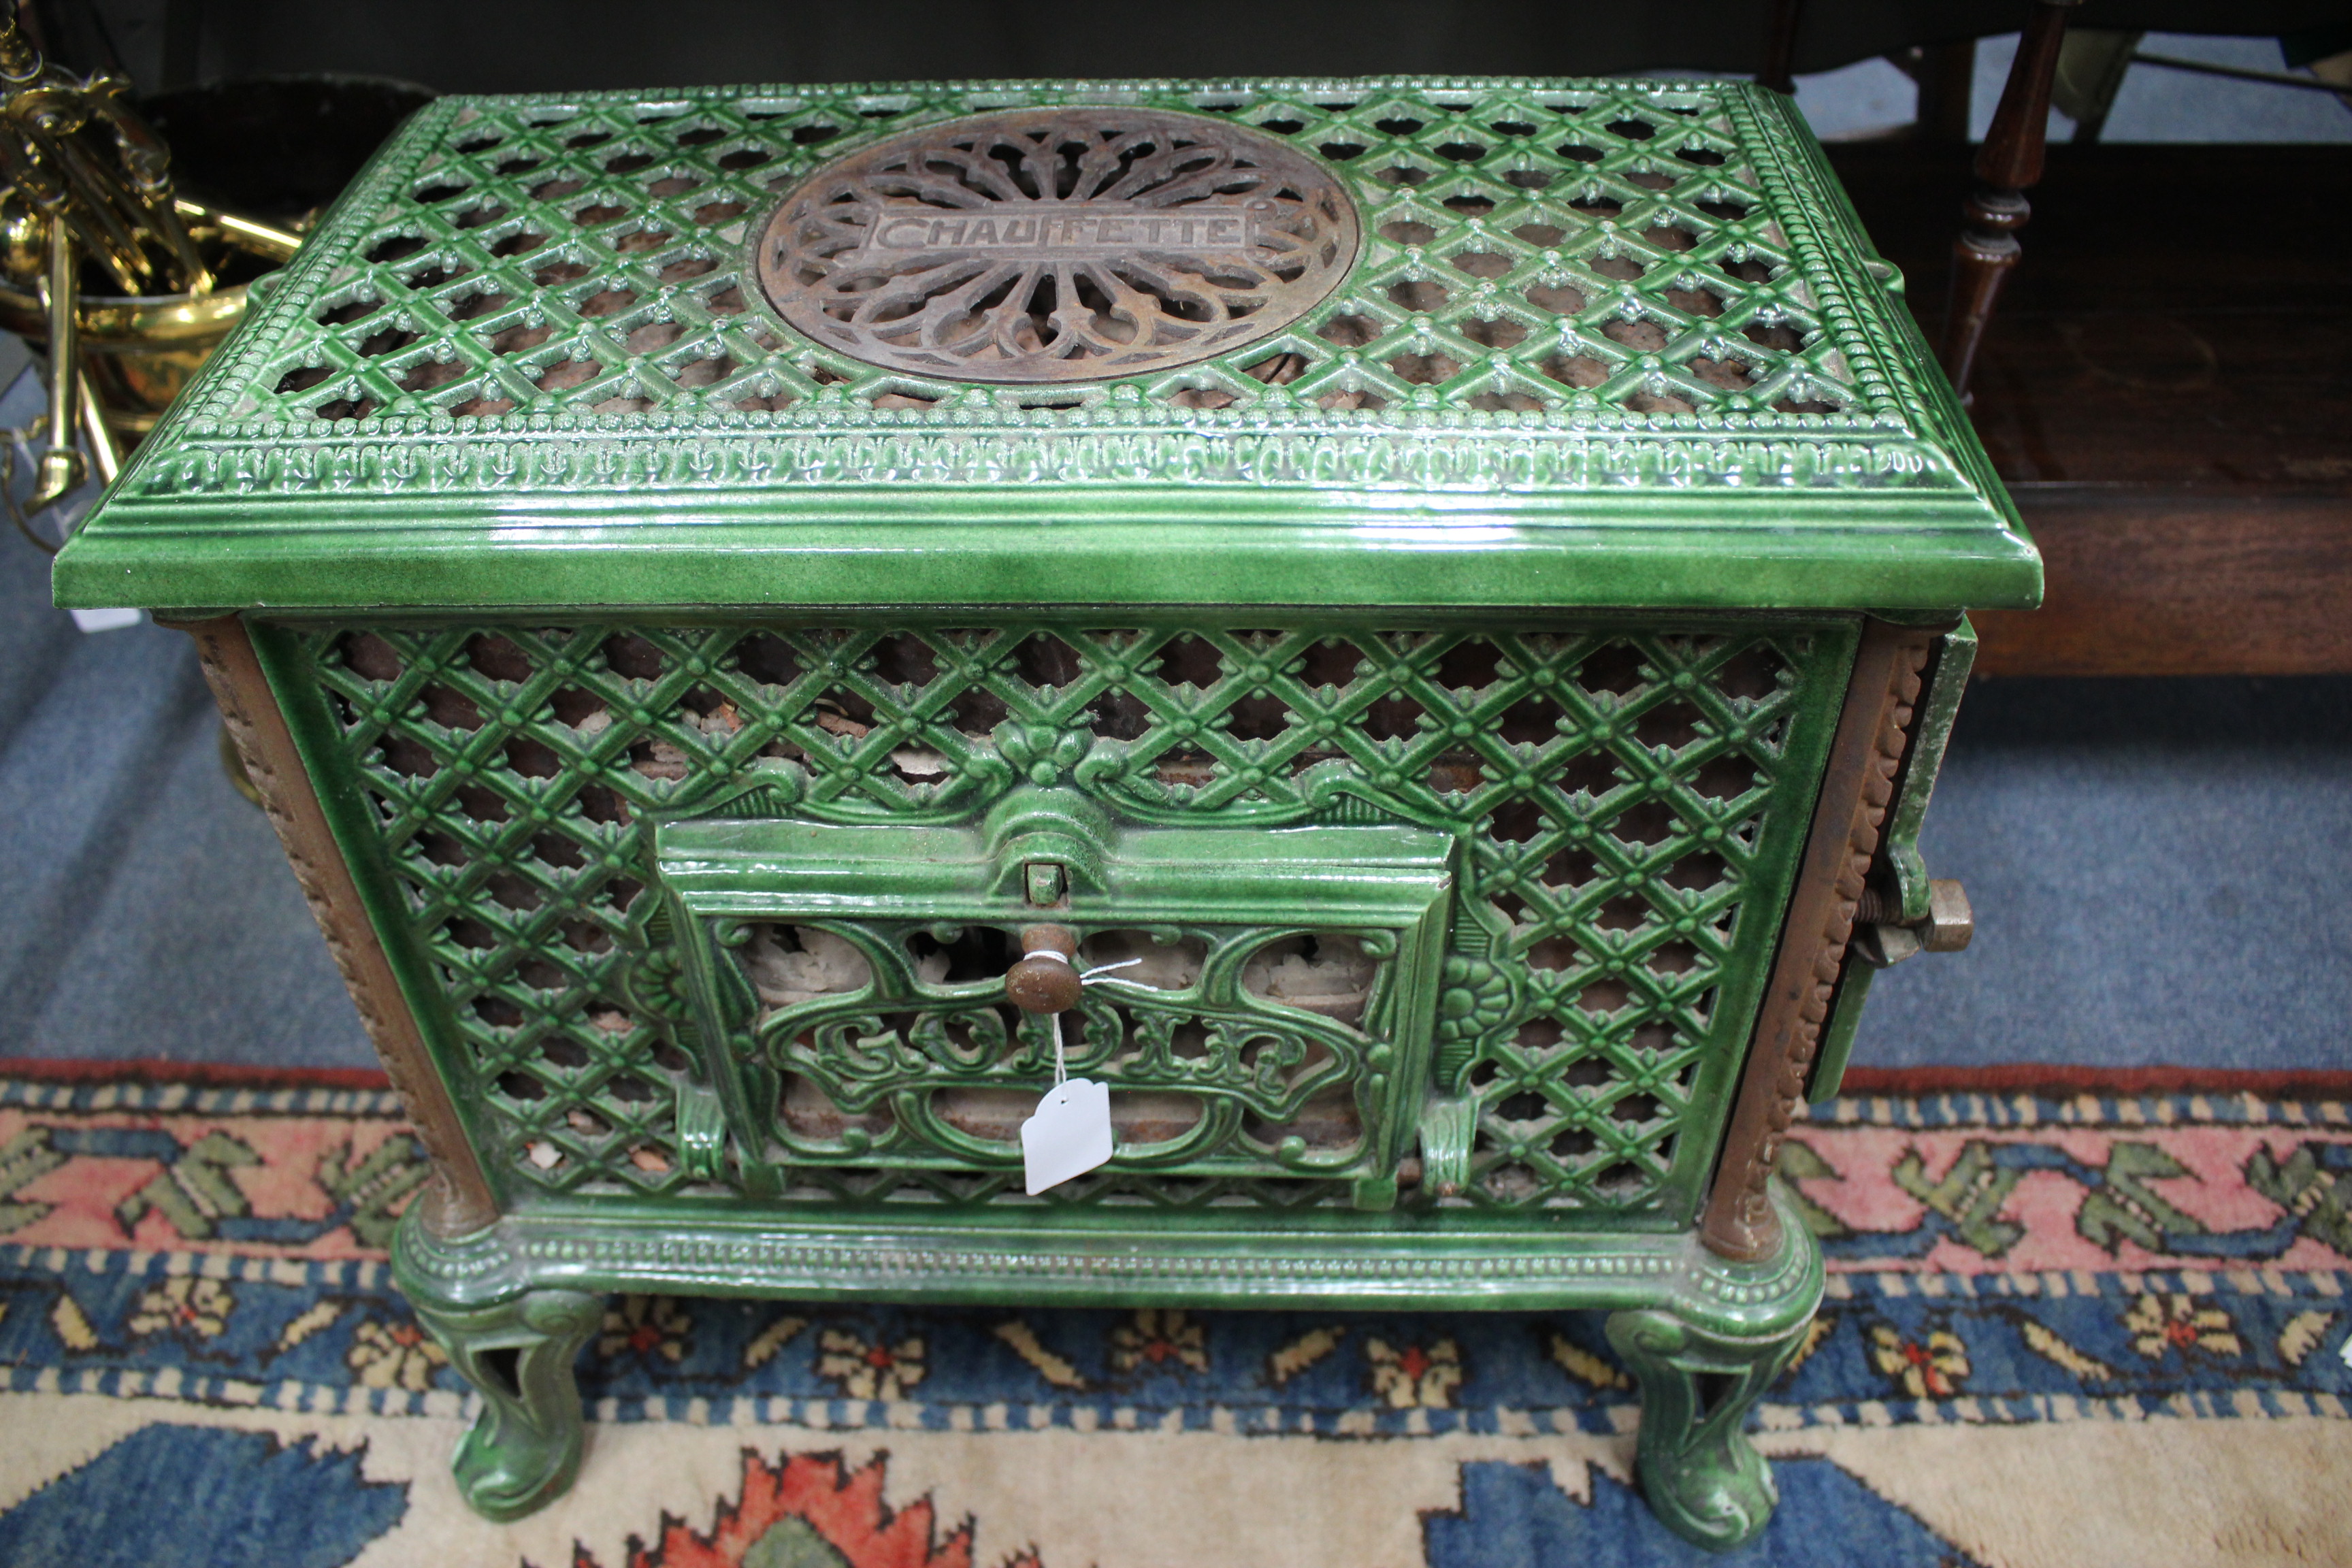 A 1920'S FRENCH GREEN ENAMELLED CHAUFFETTE WOOD BURNING STOVE by Godin and with pierced lattice work